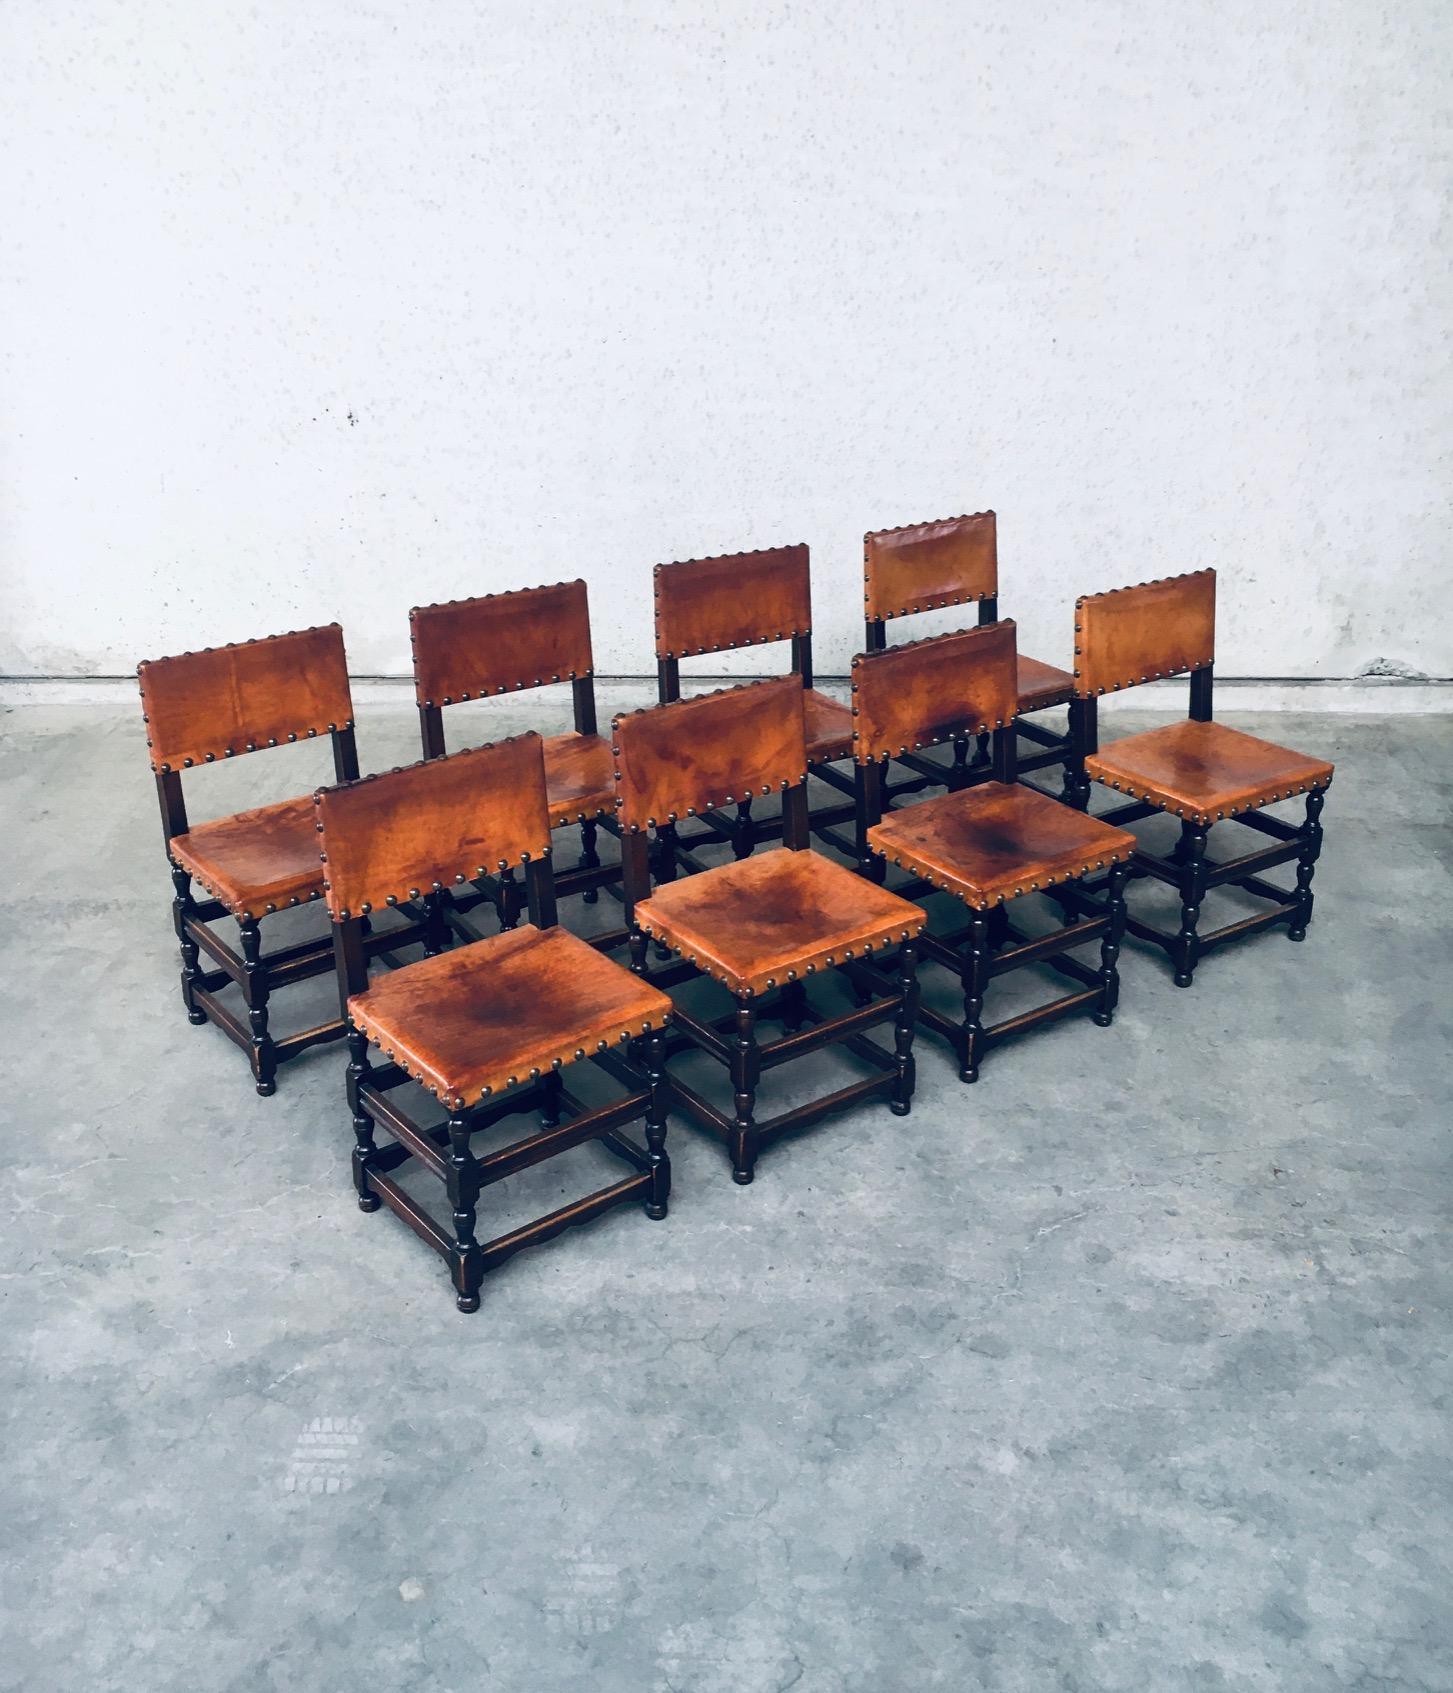 Vintage Tudor Style Cromwelian Design Style Leather Dining Chair set of 8. Made in England, 1940's. Oak dark stained frame with thick cognac natural leather seat and back, finished with brass studs. All chairs are nicely patinated on the leather